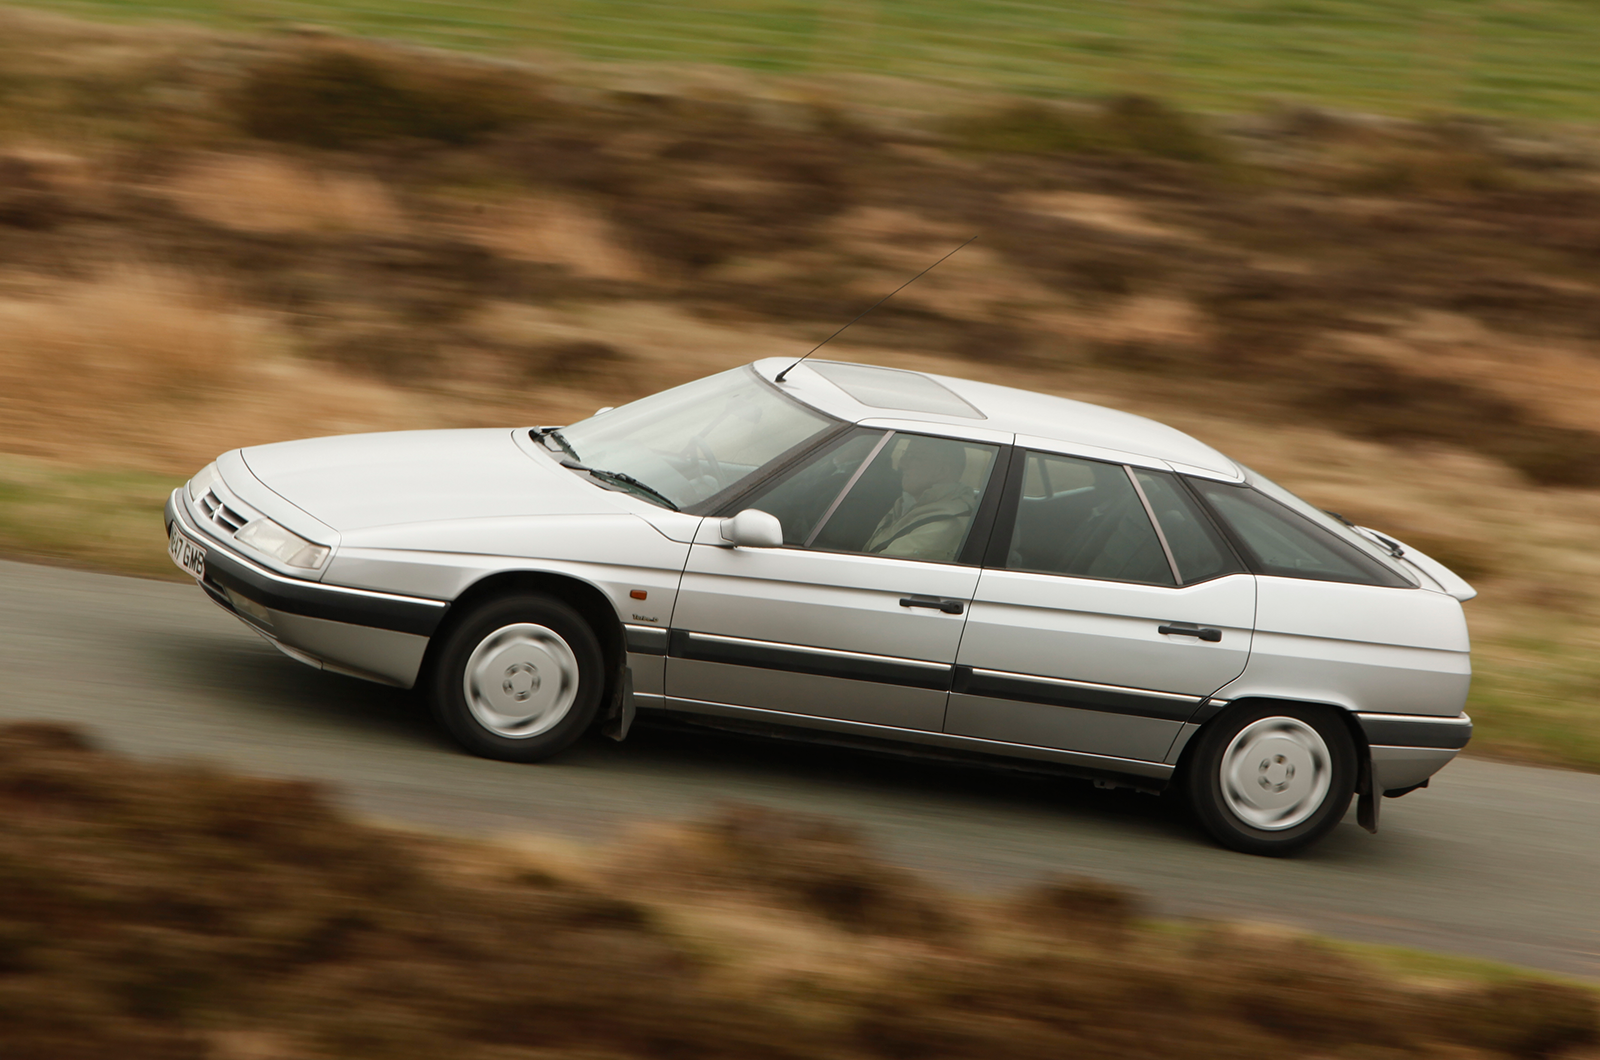 Classic & Sports Car – Celebrating the big Citroën saloon with DS, CX, XM and C6